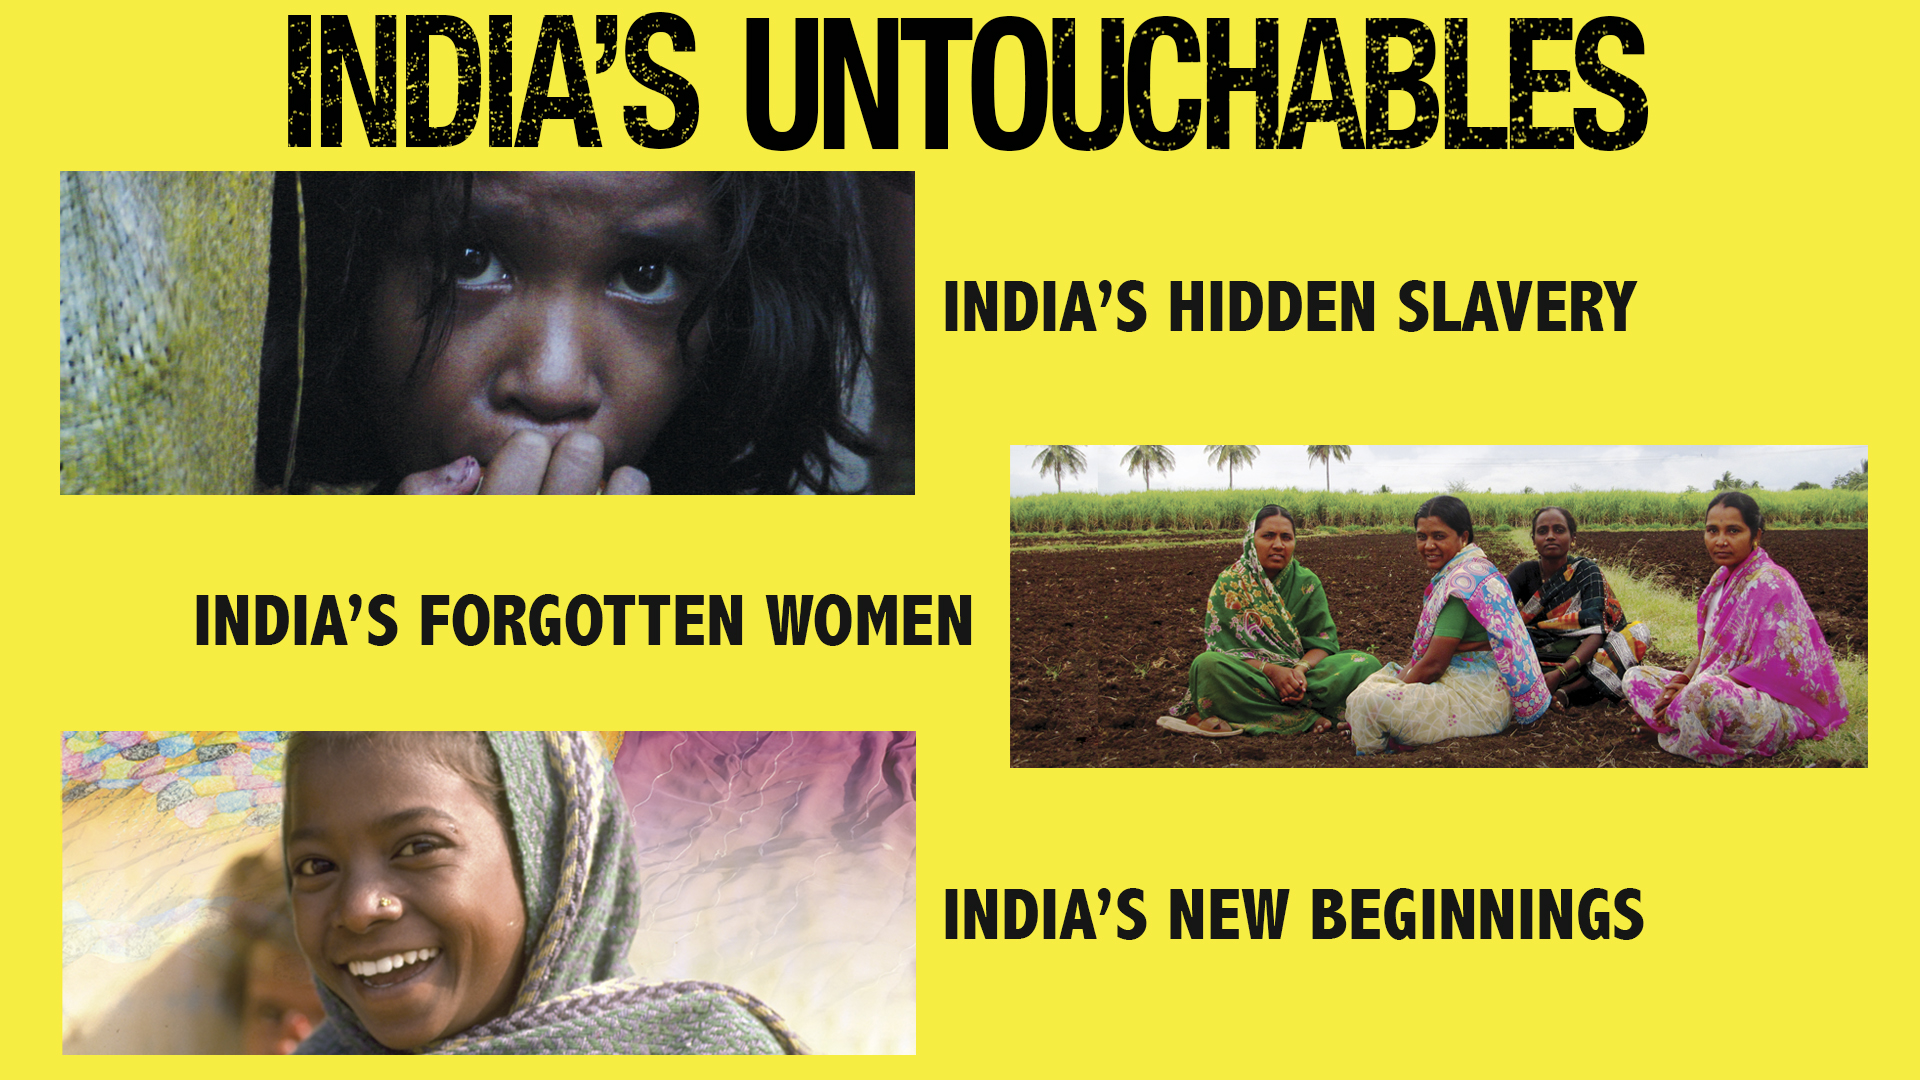 Untouchables Castes in India by Shyamlal